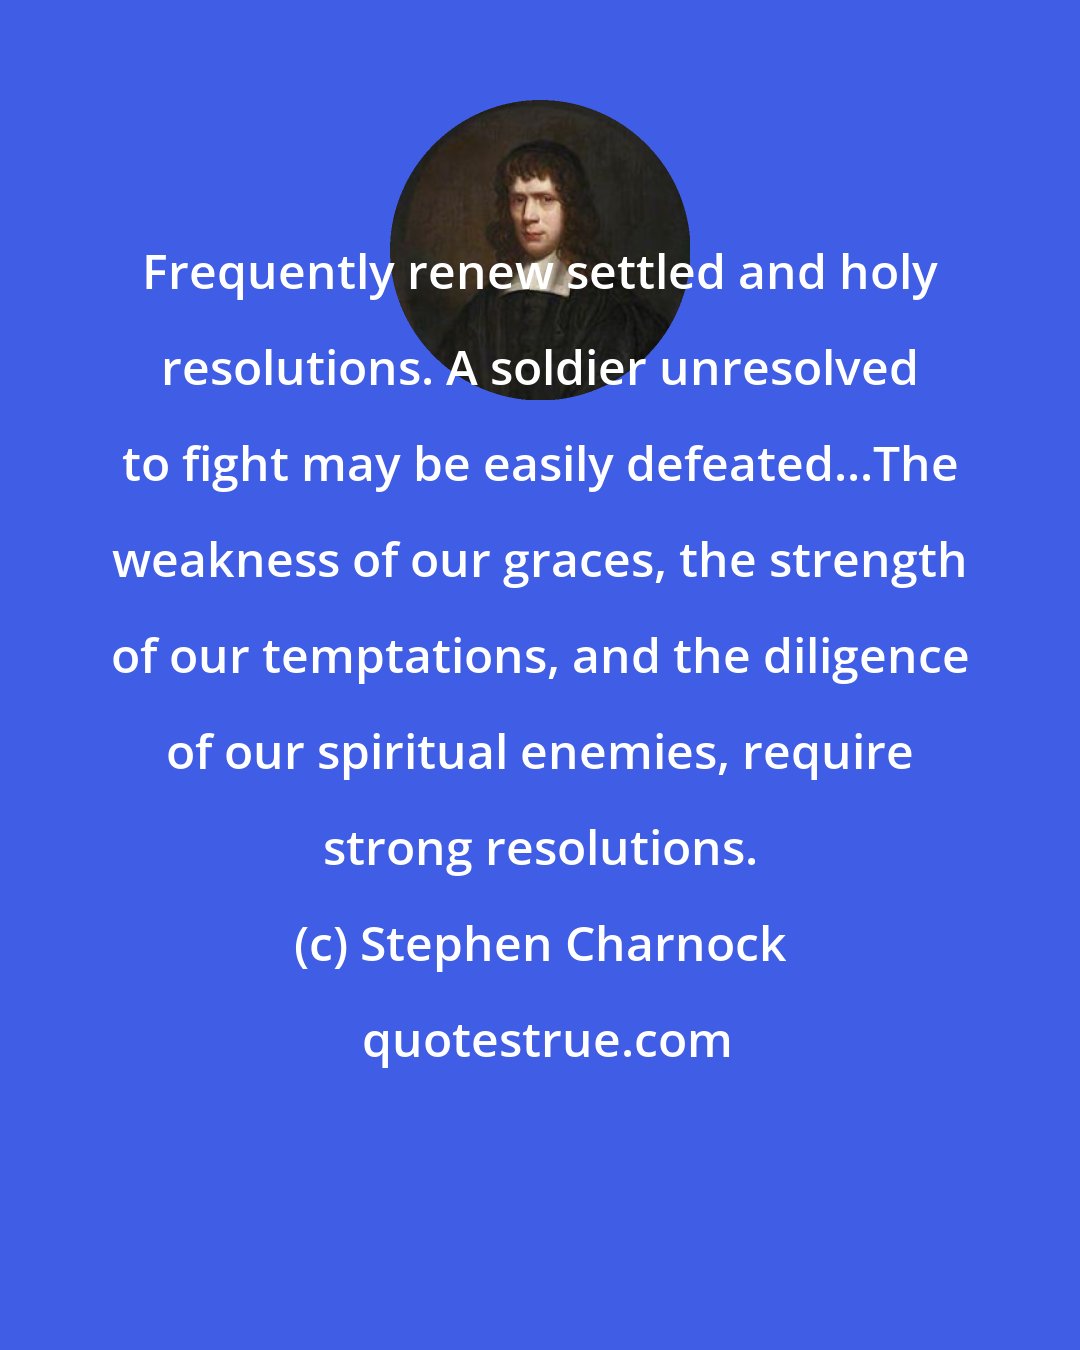 Stephen Charnock: Frequently renew settled and holy resolutions. A soldier unresolved to fight may be easily defeated...The weakness of our graces, the strength of our temptations, and the diligence of our spiritual enemies, require strong resolutions.